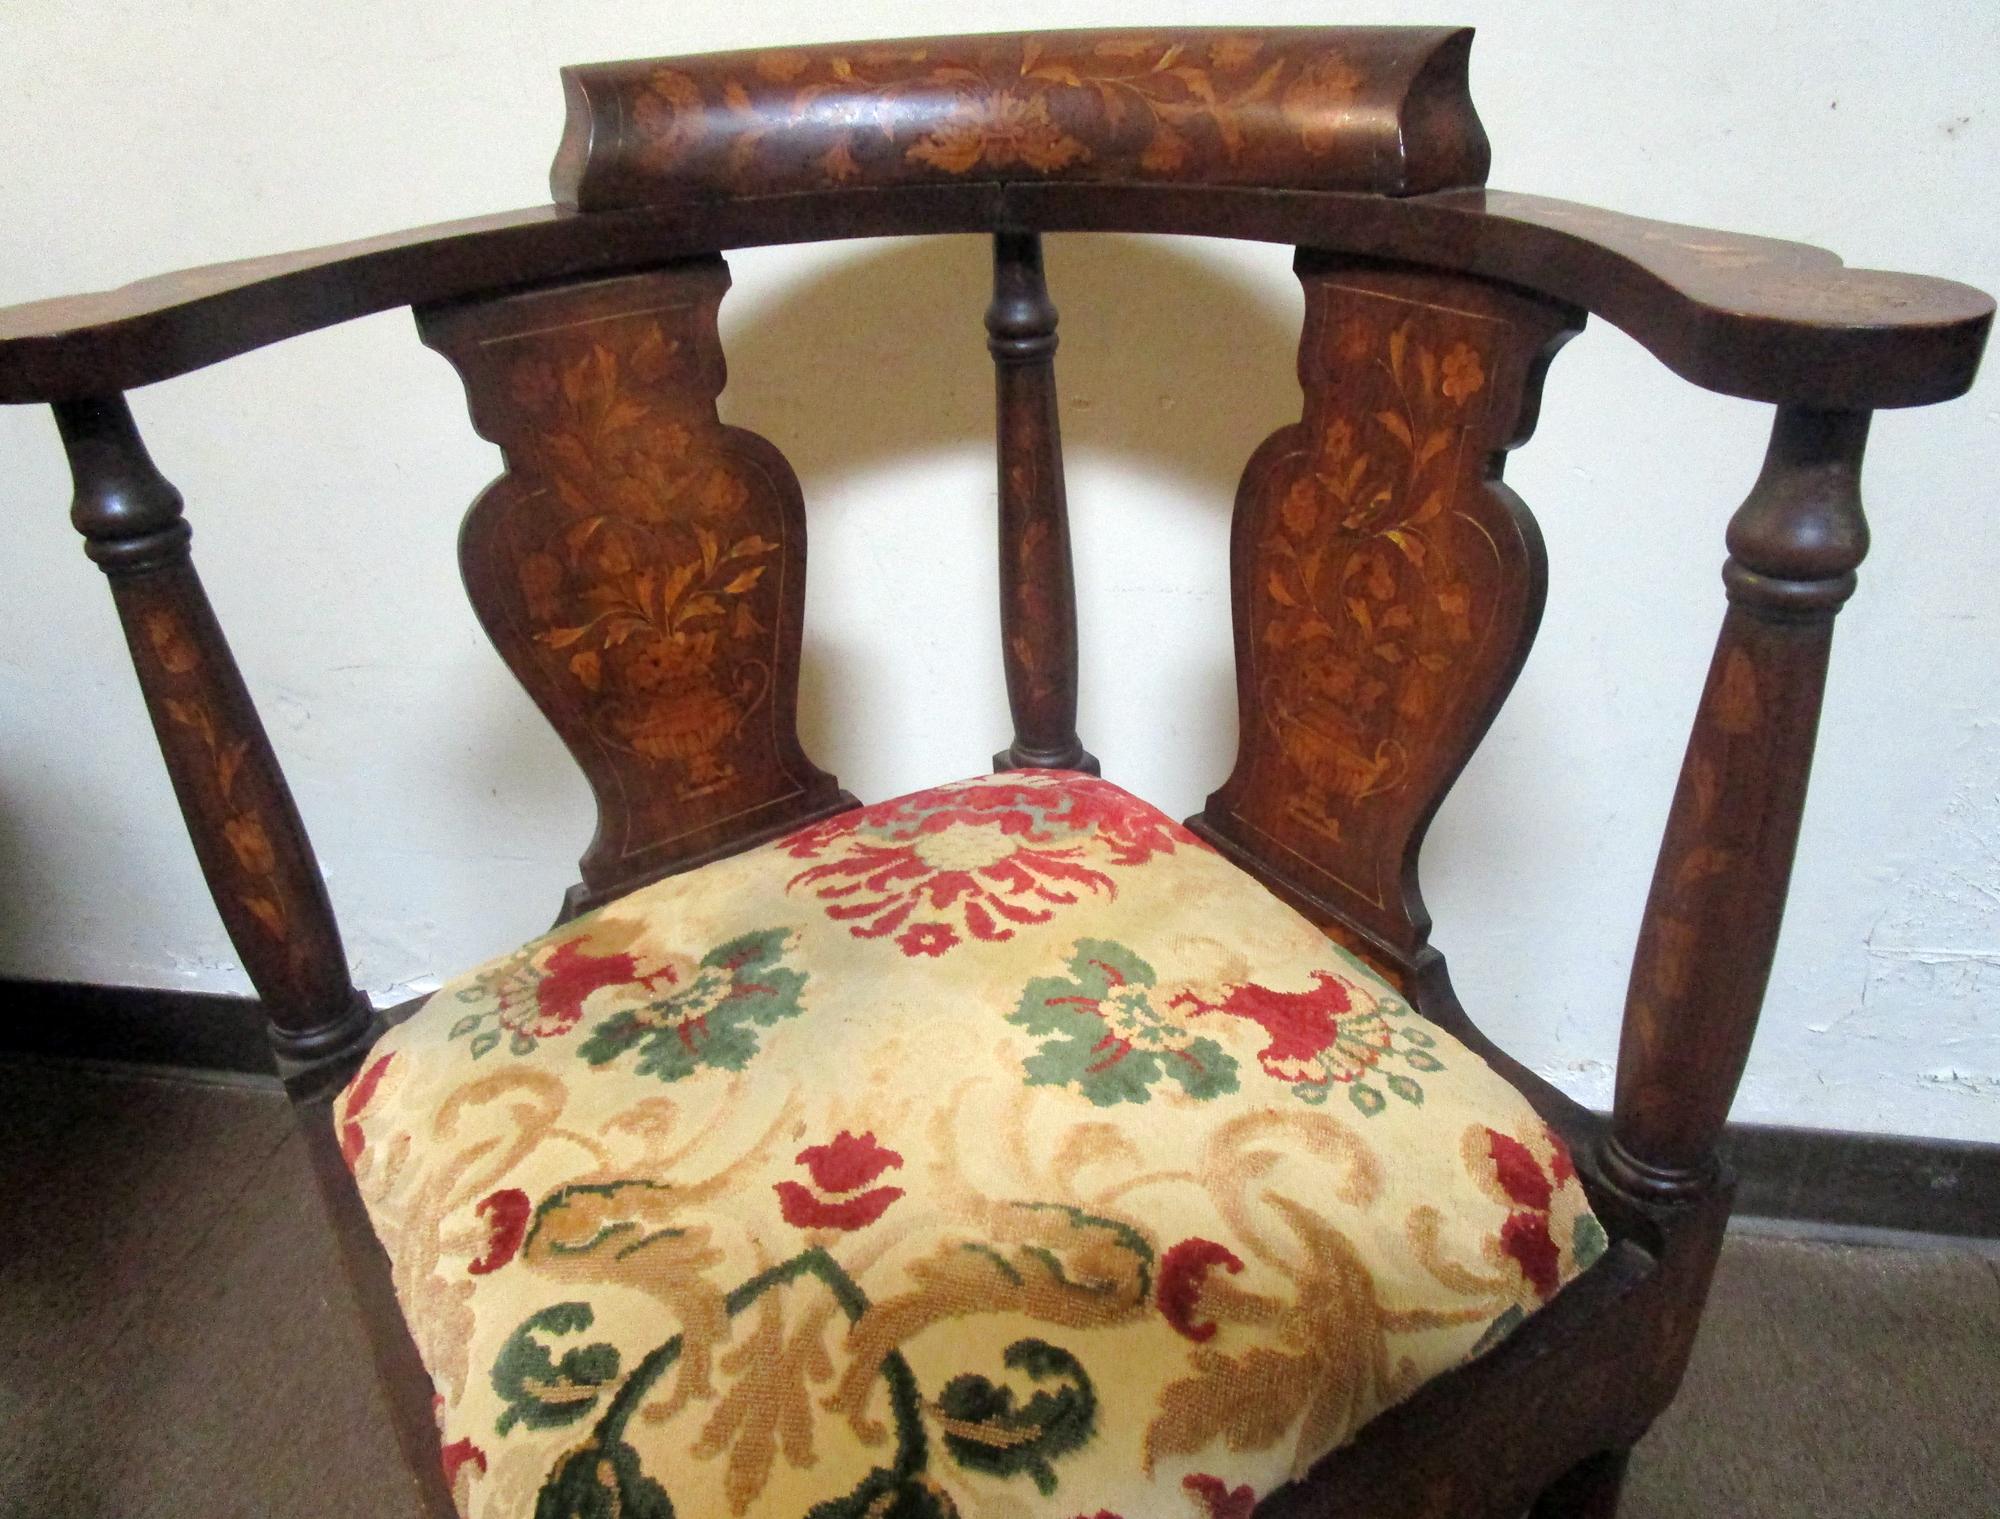 18th Century Chippendale Corner Chair with Marquetry Inlay In Good Condition For Sale In Savannah, GA